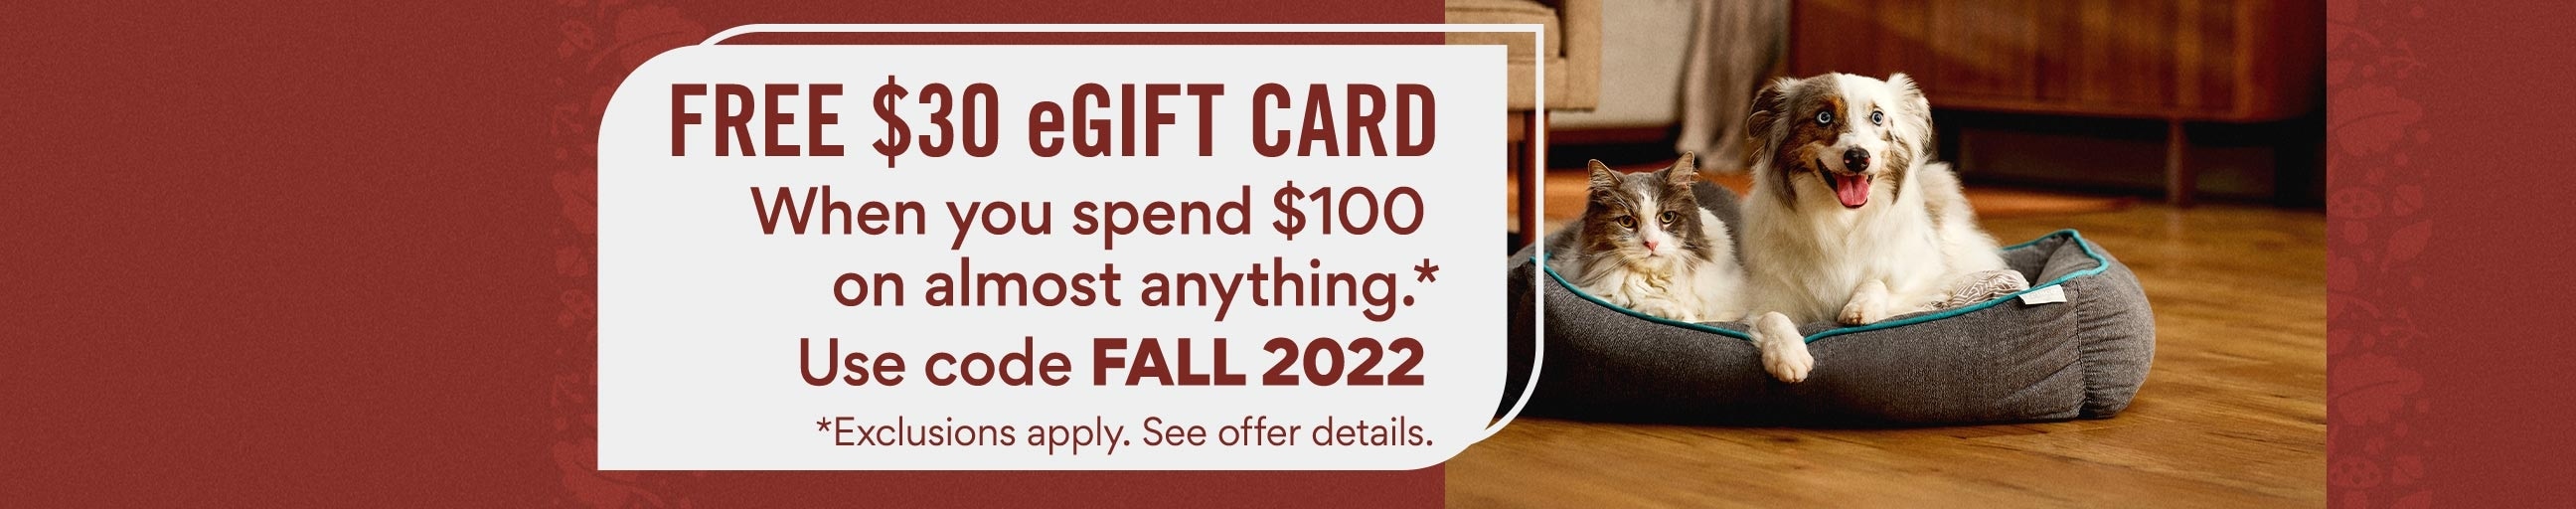 free $30 egift card when you spend $100 on almost anything. use code FALL2022. exclusions apply. see offer details. shop now